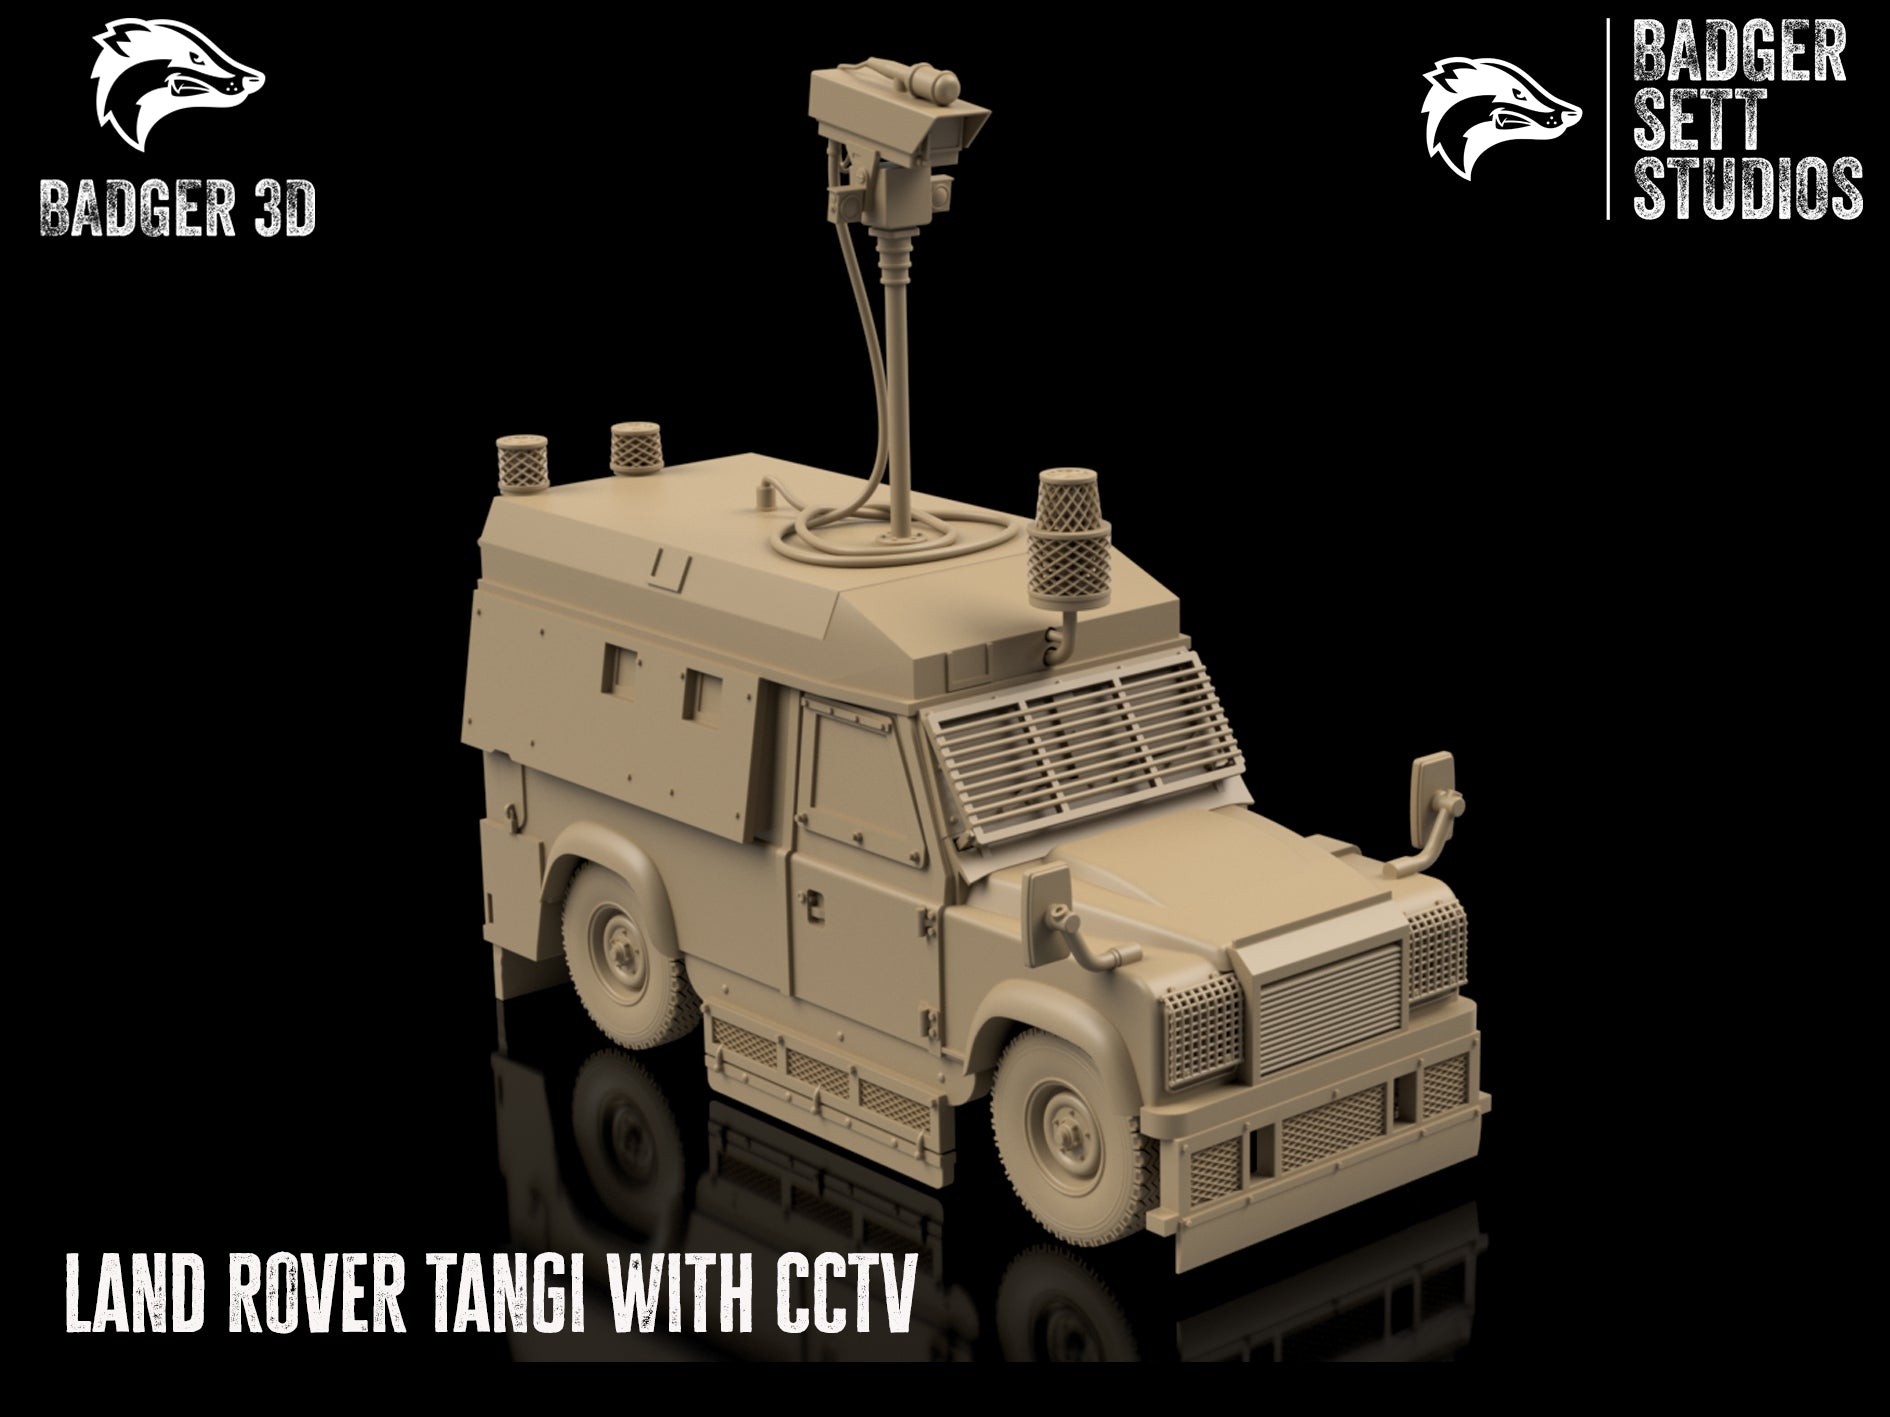 Land Rover Tangi with CCTV